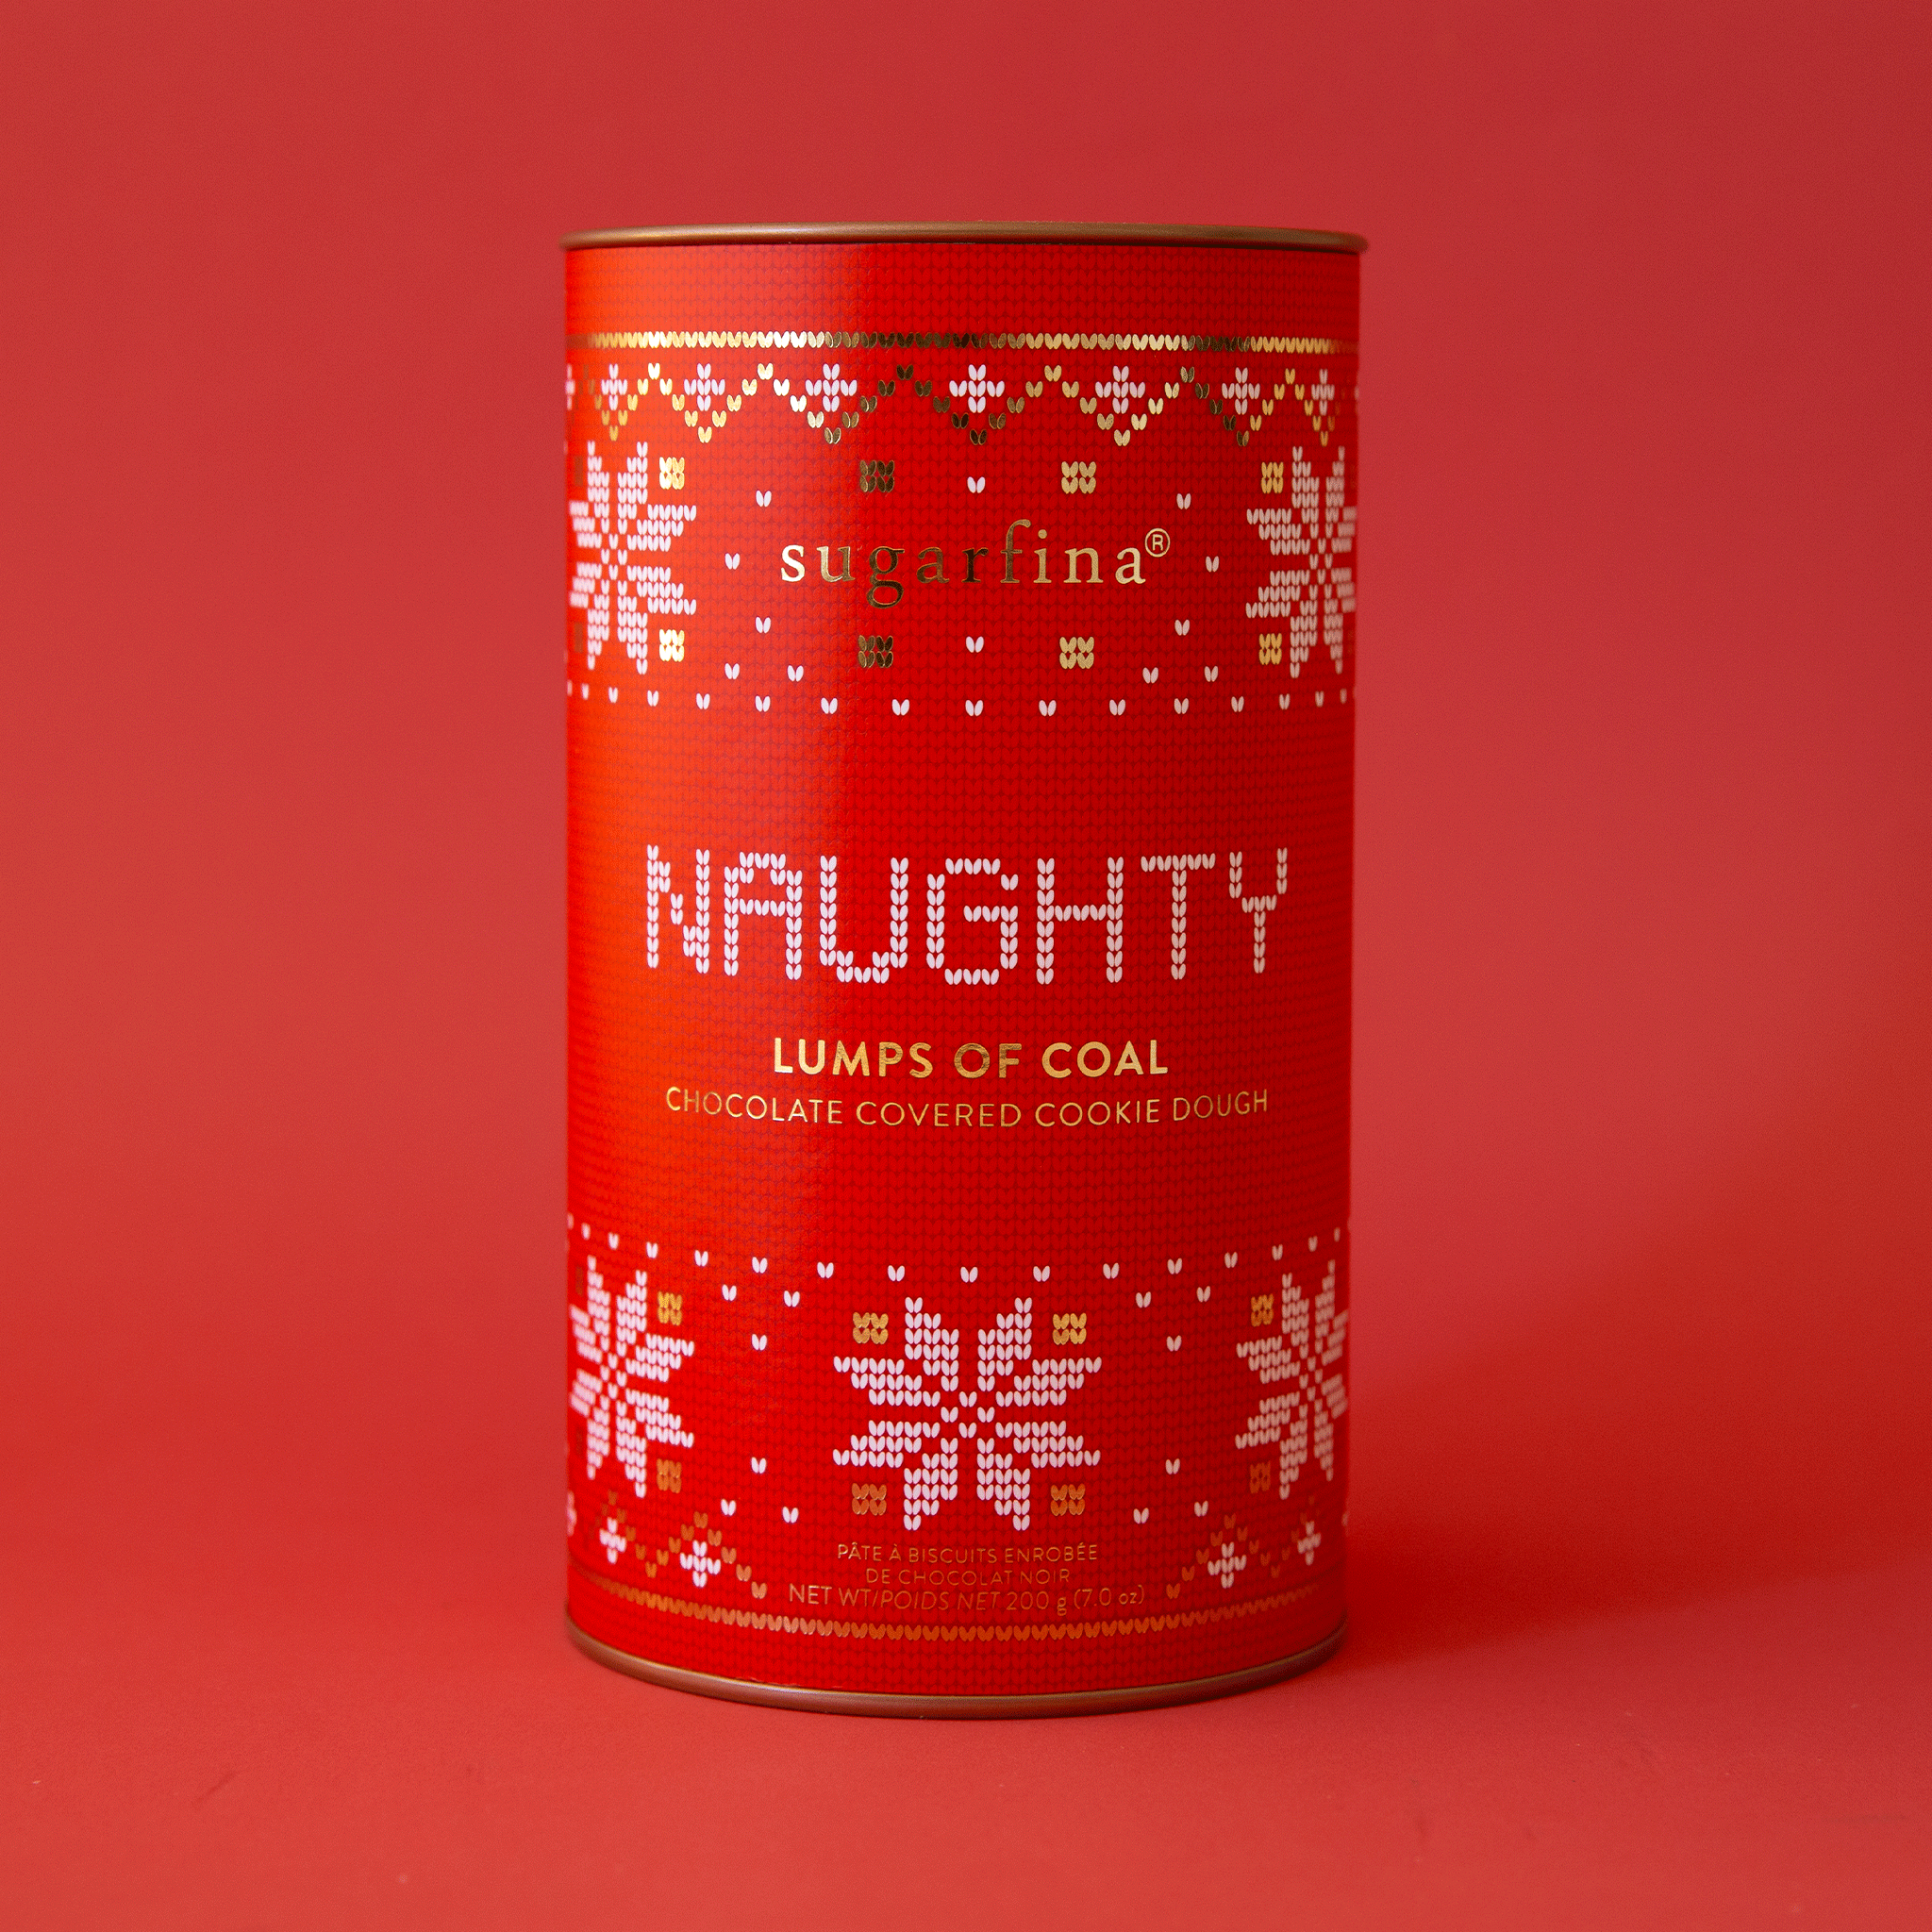 On a red background is a red canister with white snowflake designs and text that reads, "Naughty Lumps of Coal Chocolate Covered Cookie Dough".